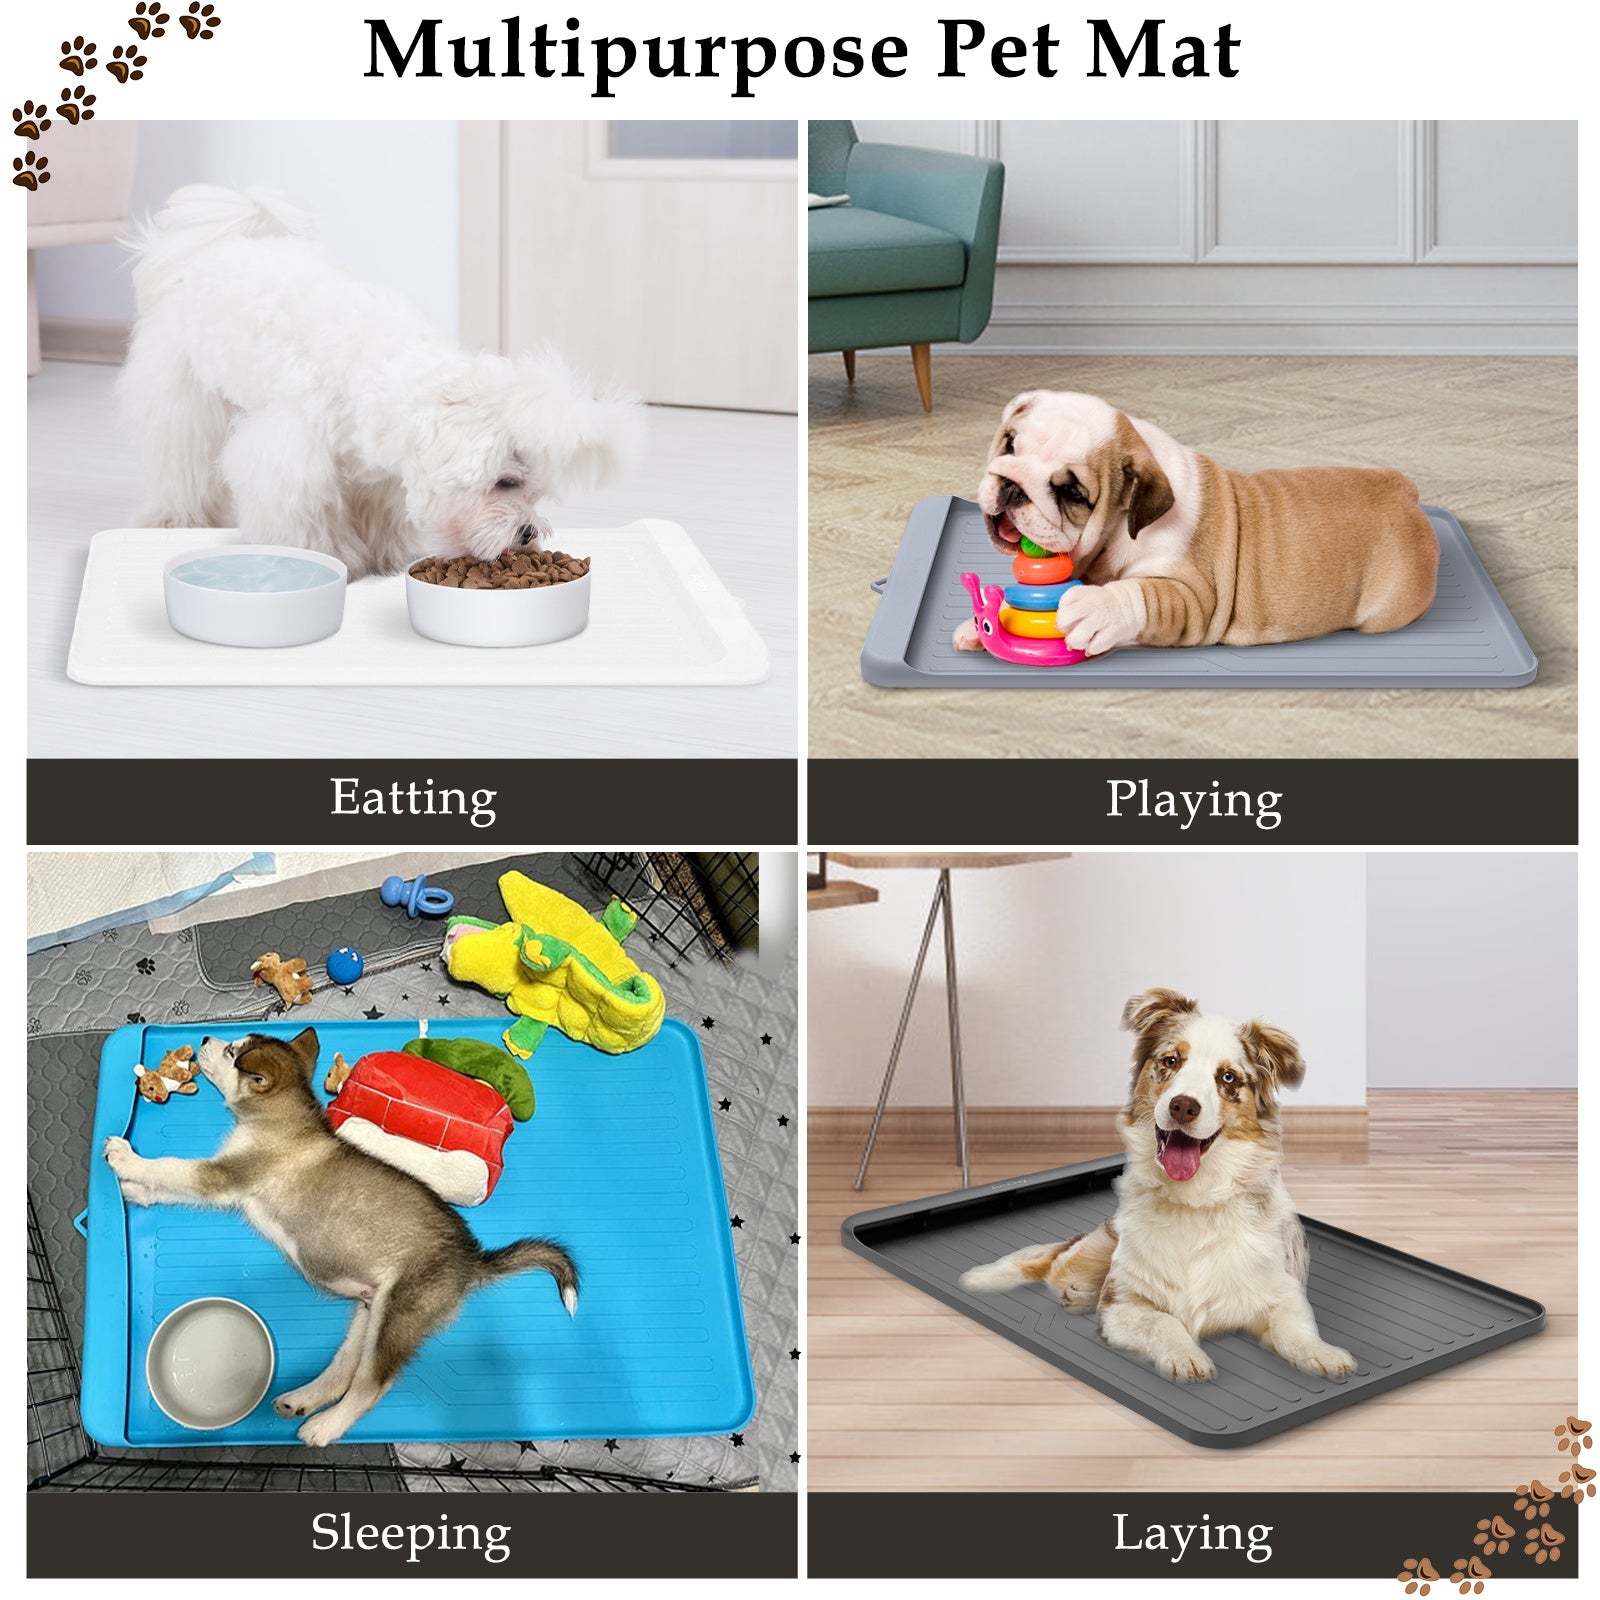 AECHY Dog Mat for Food and Water, 36x24 Silicone Dog Food Mat with